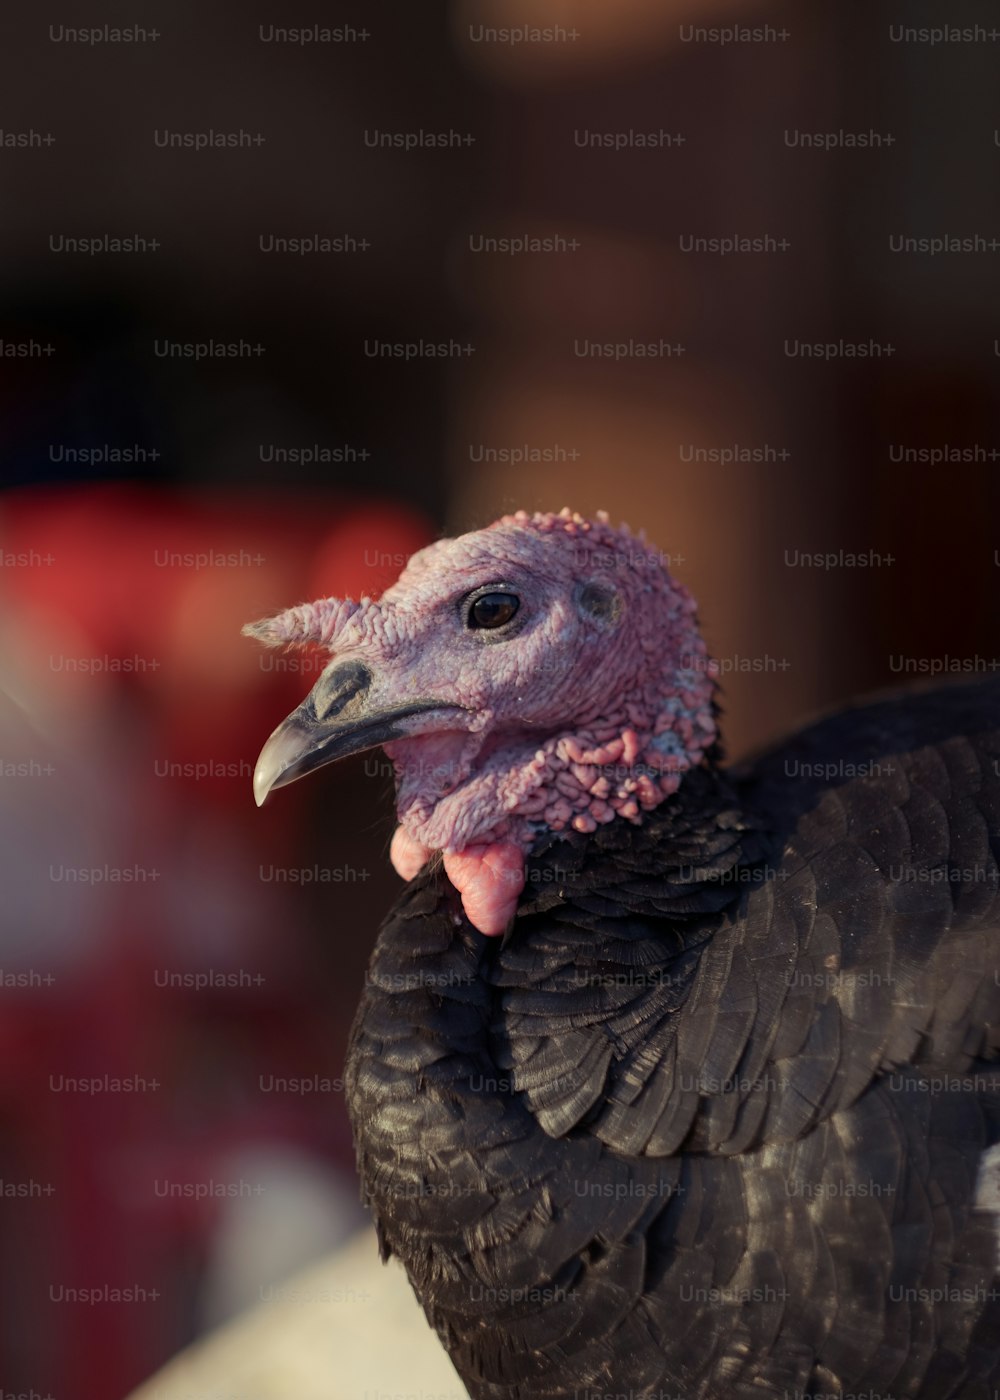 a close up of a turkey with a blurry background